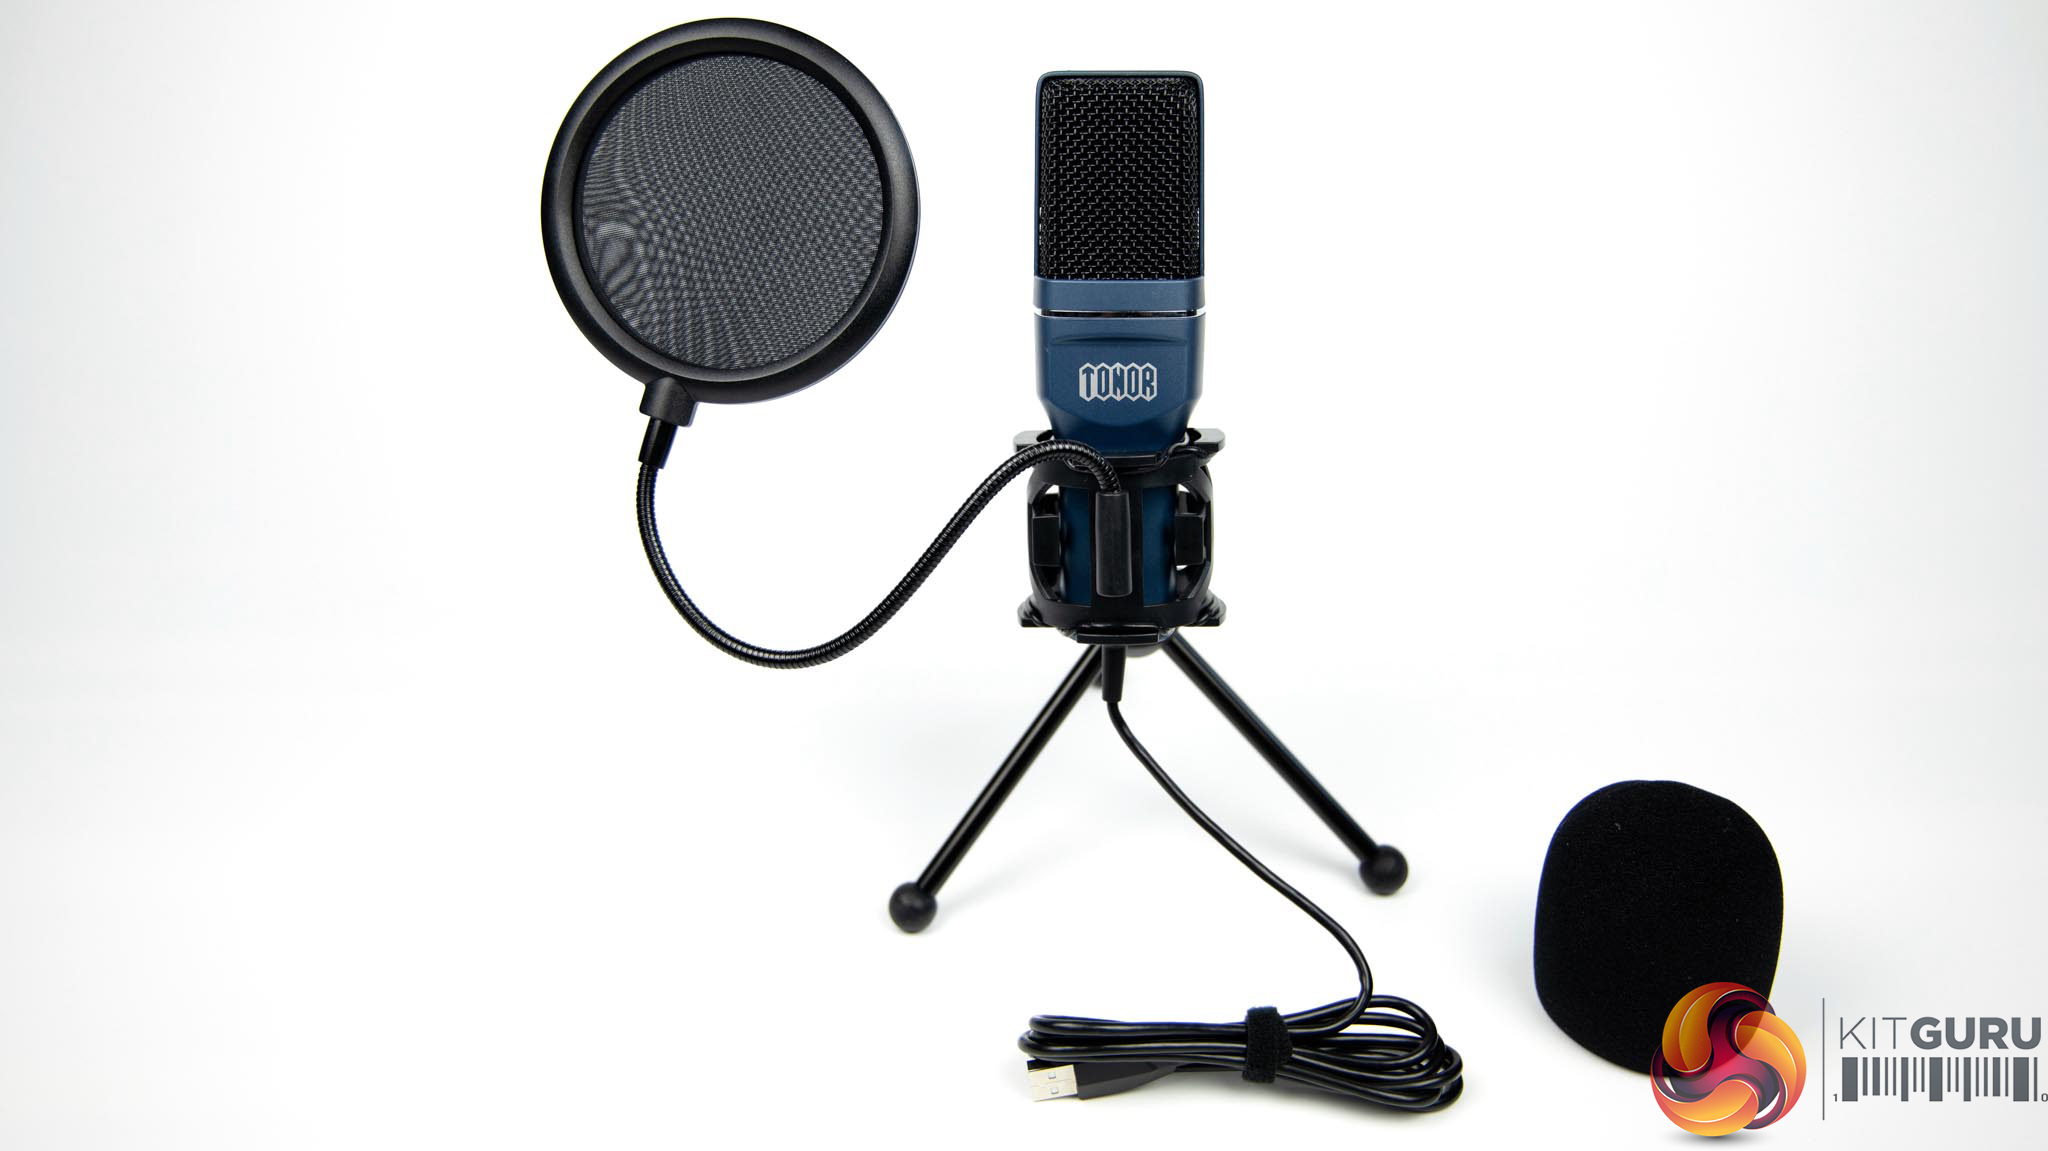 TONOR TC-777 USB Microphone review - The Gadgeteer